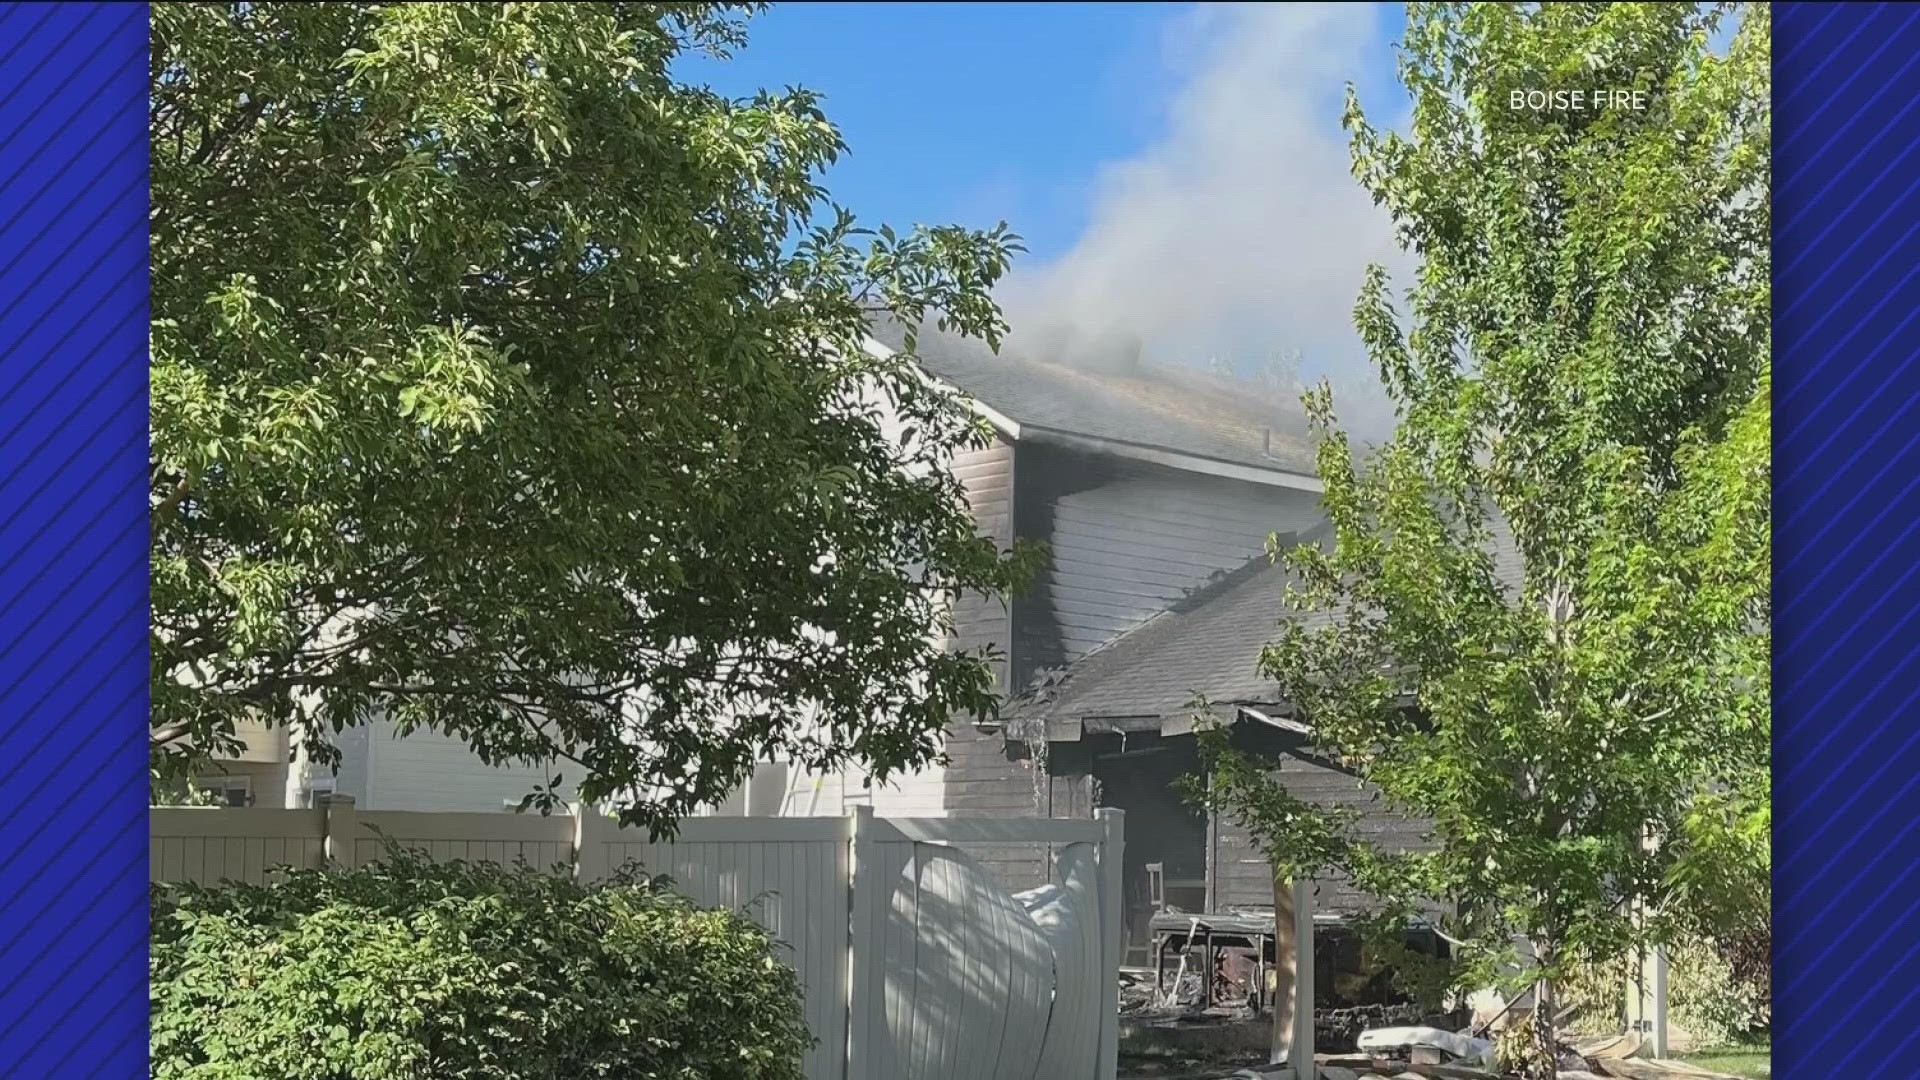 The Boise Fire Department said the fire was caused by hot ash from cigarettes placed in a plastic container.